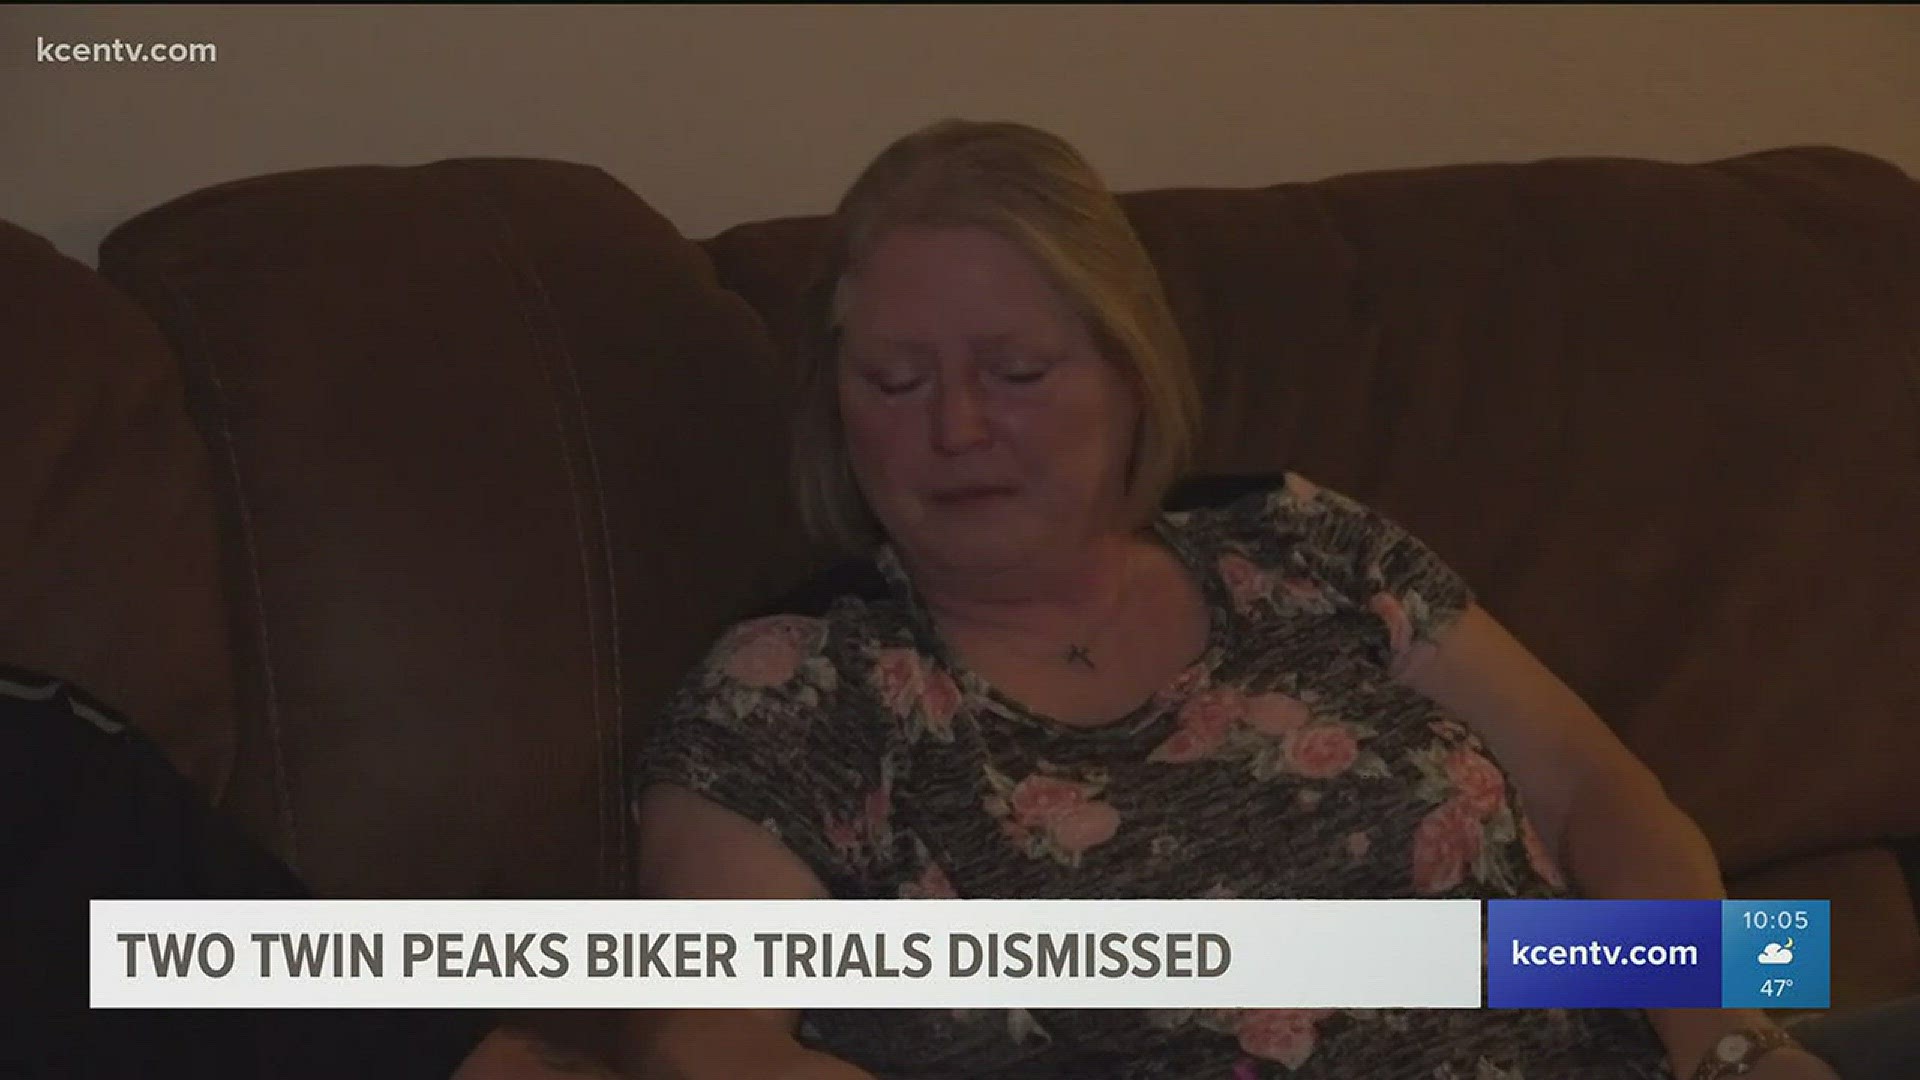 Two more Twin Peaks cases against bikers were dismissed